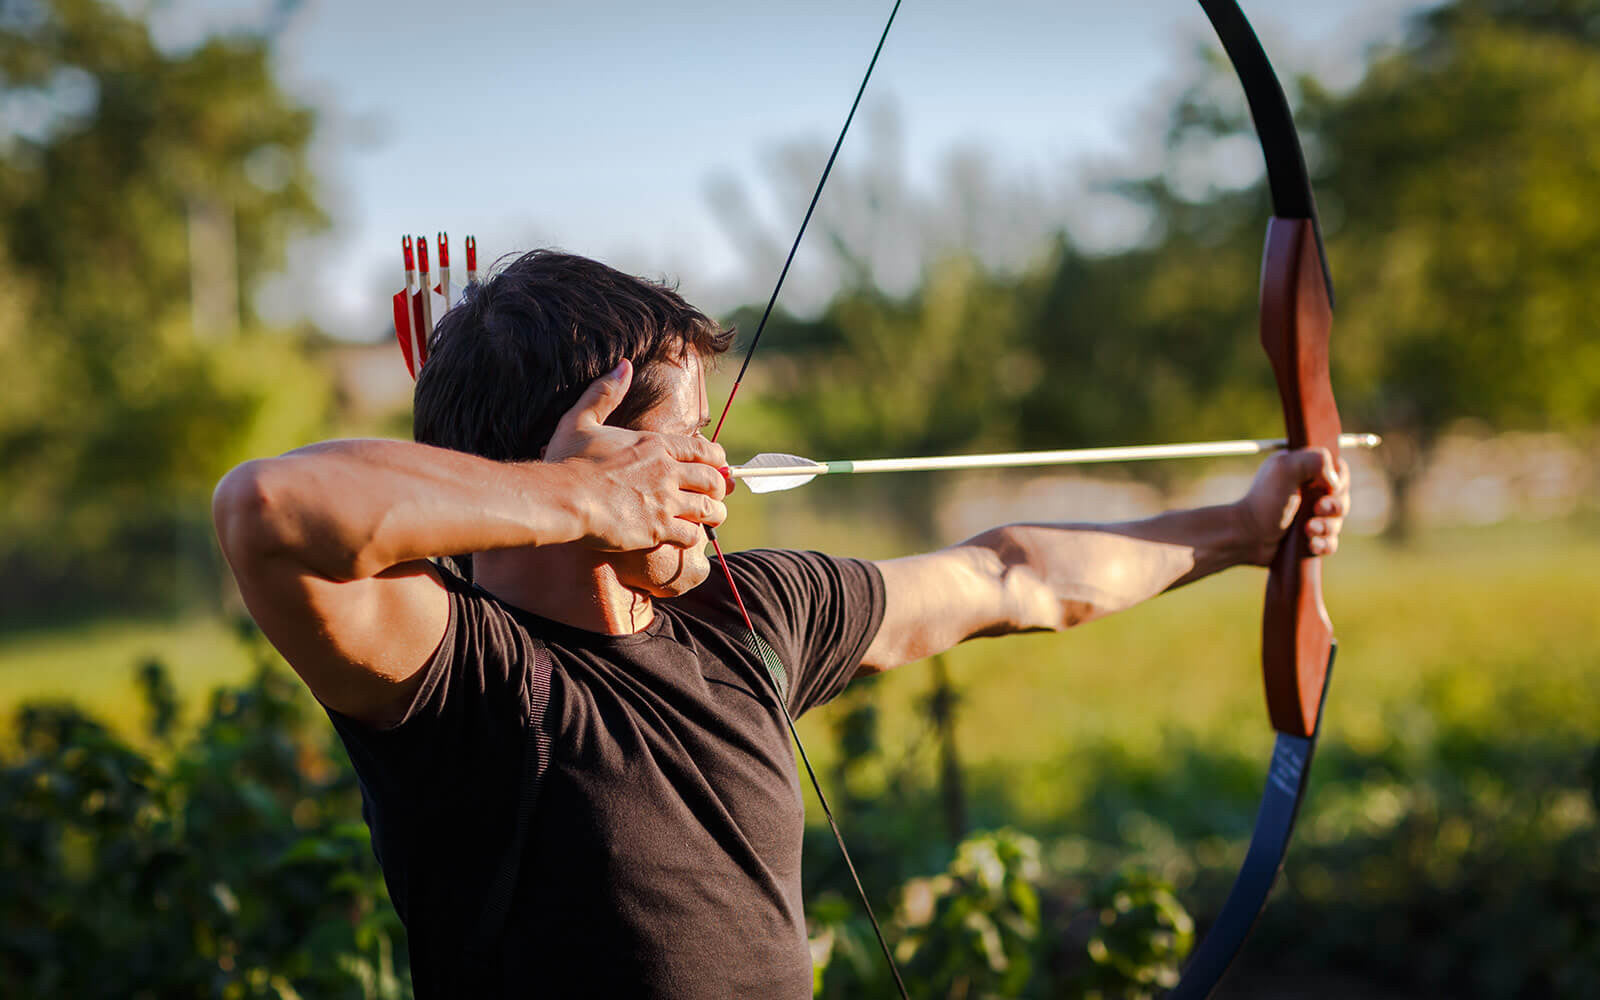 Archery is all about letting go including the arrow!